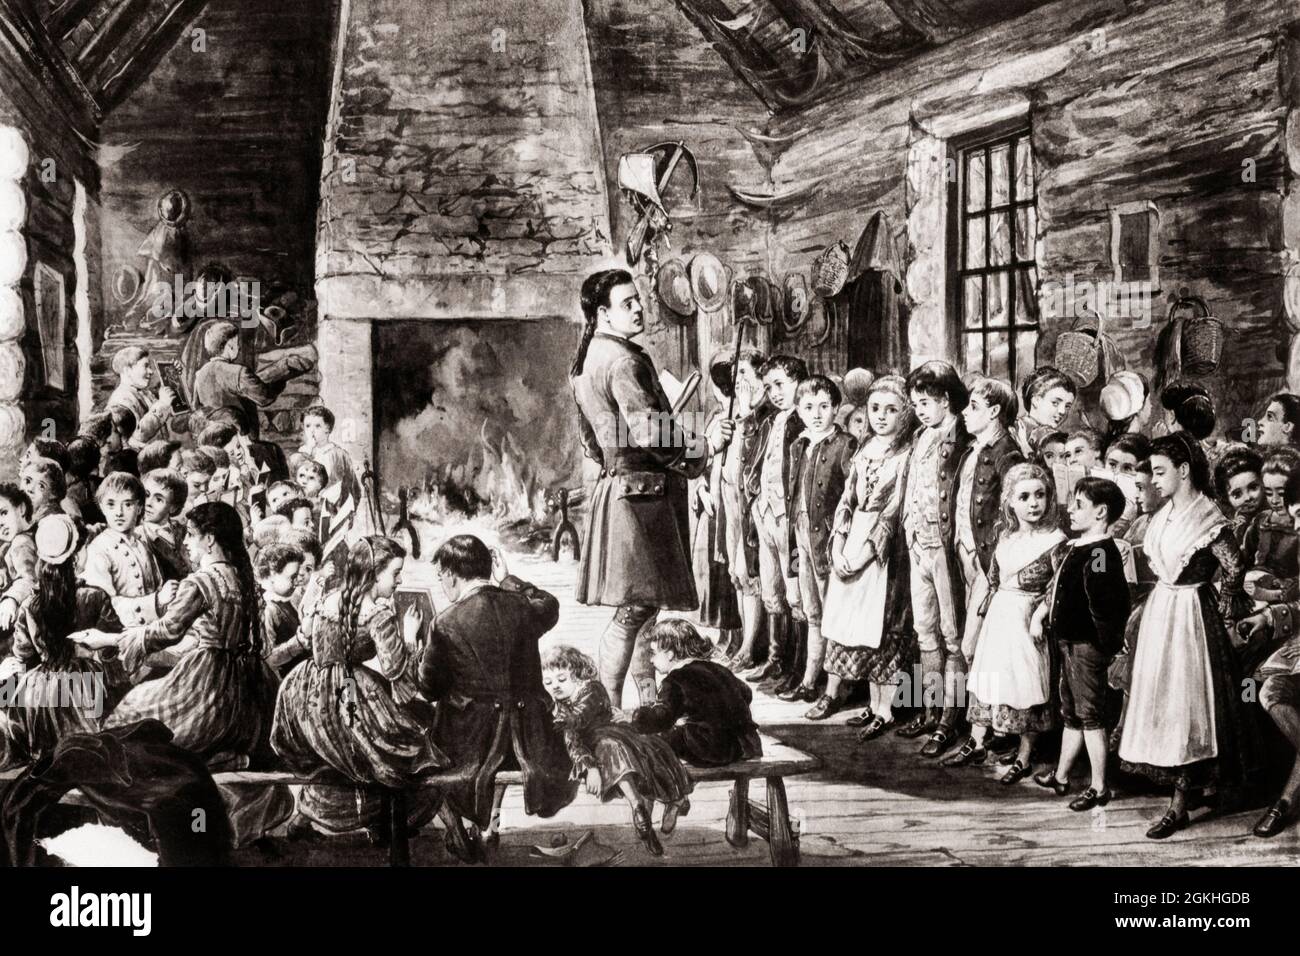 1700s INTERIOR OF 18TH CENTURY COLONIAL AMERICAN ONE ROOM SCHOOL WITH MALE TEACHER AND STUDENTS BY LARGE FIREPLACE  - q73003 CPC001 HARS B&W SCHOOLS GRADE RUSTIC AND INSTRUCTOR LEADERSHIP AUTHORITY OCCUPATIONS PRIMARY EDUCATOR ONE ROOM K-12 COOPERATION EDUCATING EDUCATORS GRADE SCHOOL GROWTH IDEAS INSTRUCTORS JUVENILES SCHOOL TEACHES TOGETHERNESS YOUNG ADULT MAN 1700s BLACK AND WHITE LOG CABIN OLD FASHIONED Stock Photo